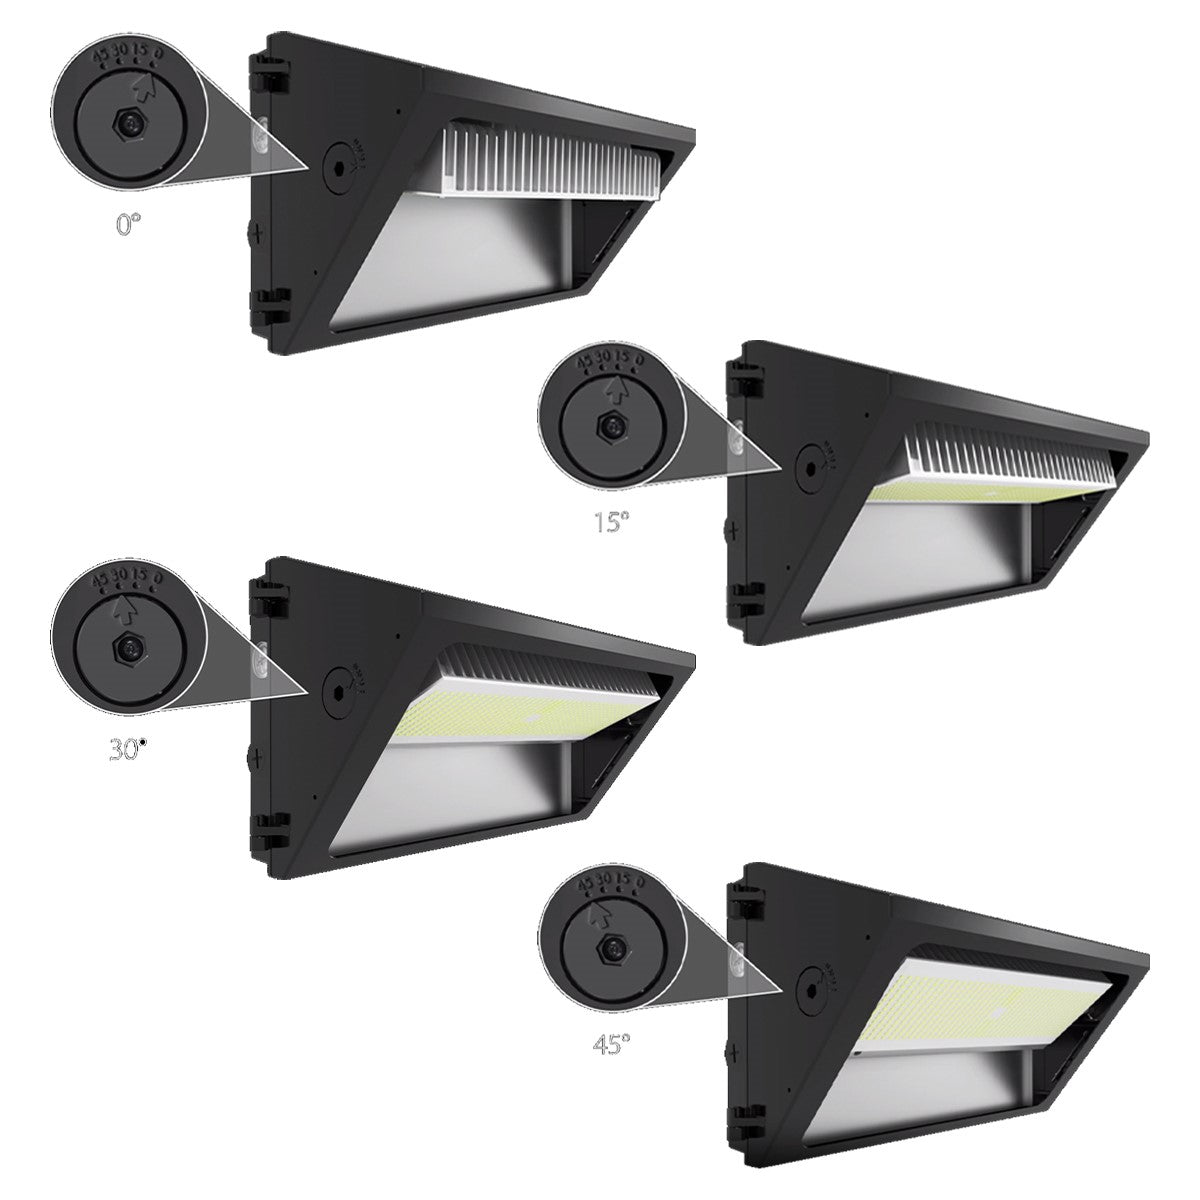 LED Standard Wall Pack With Photocell, 21000 Lumens, 75-150 Adjustable Wattage, Selectable CCT 30K/40K/50K, 120/277V, Adjustable Throw - Bees Lighting